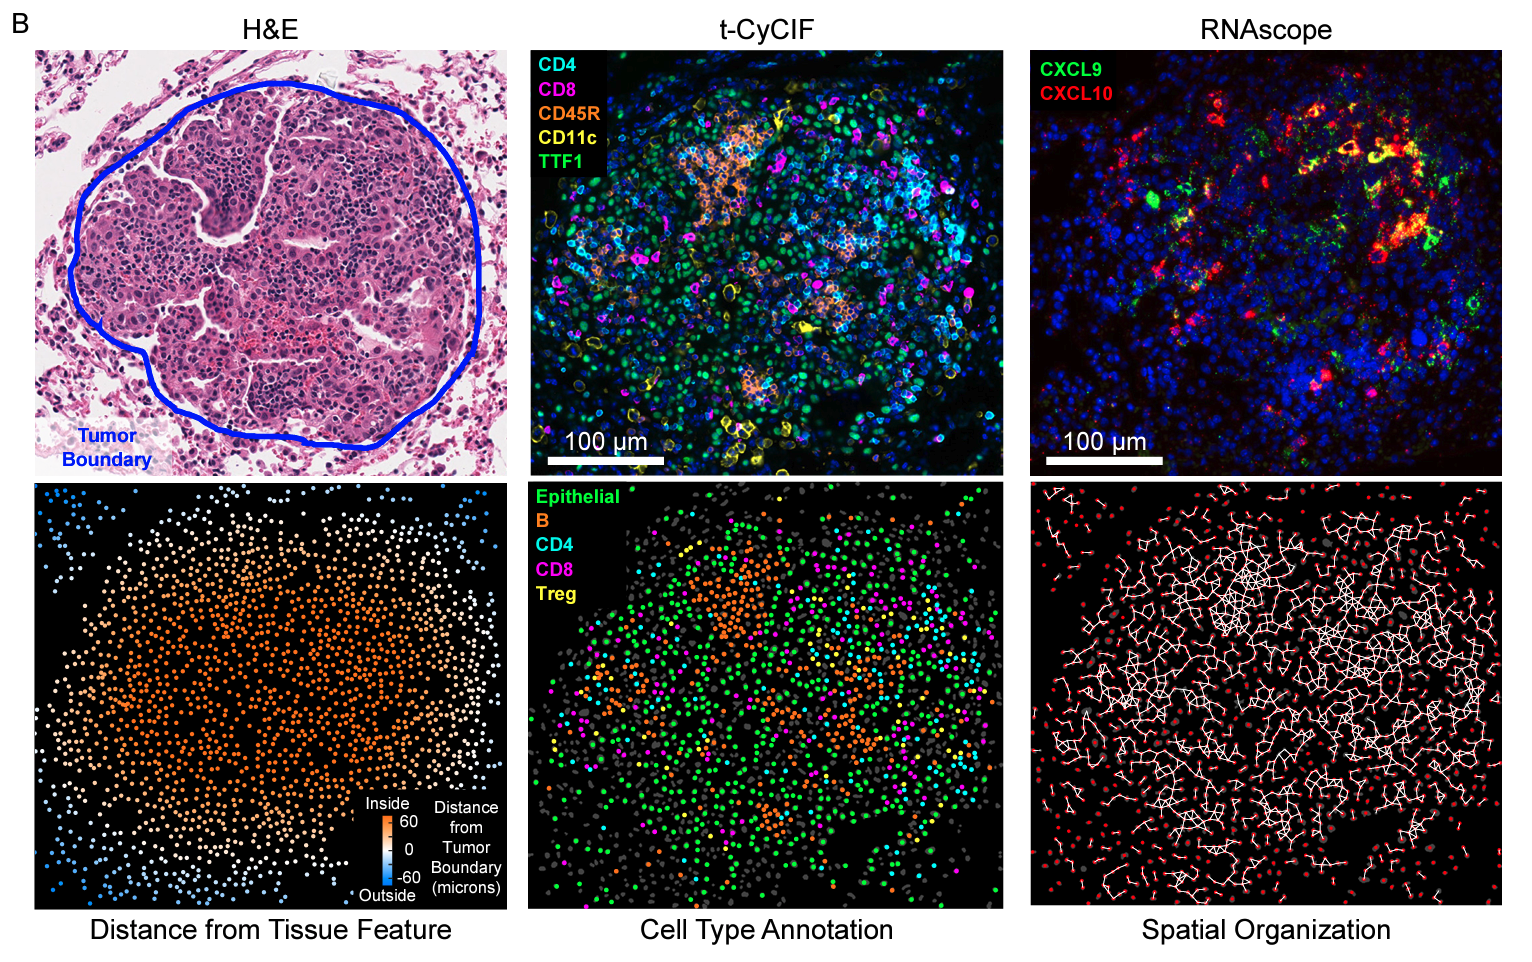 Lymphocyte networks are dynamic cellular communities in the immunoregulatory landscape of lung adenocarcinoma